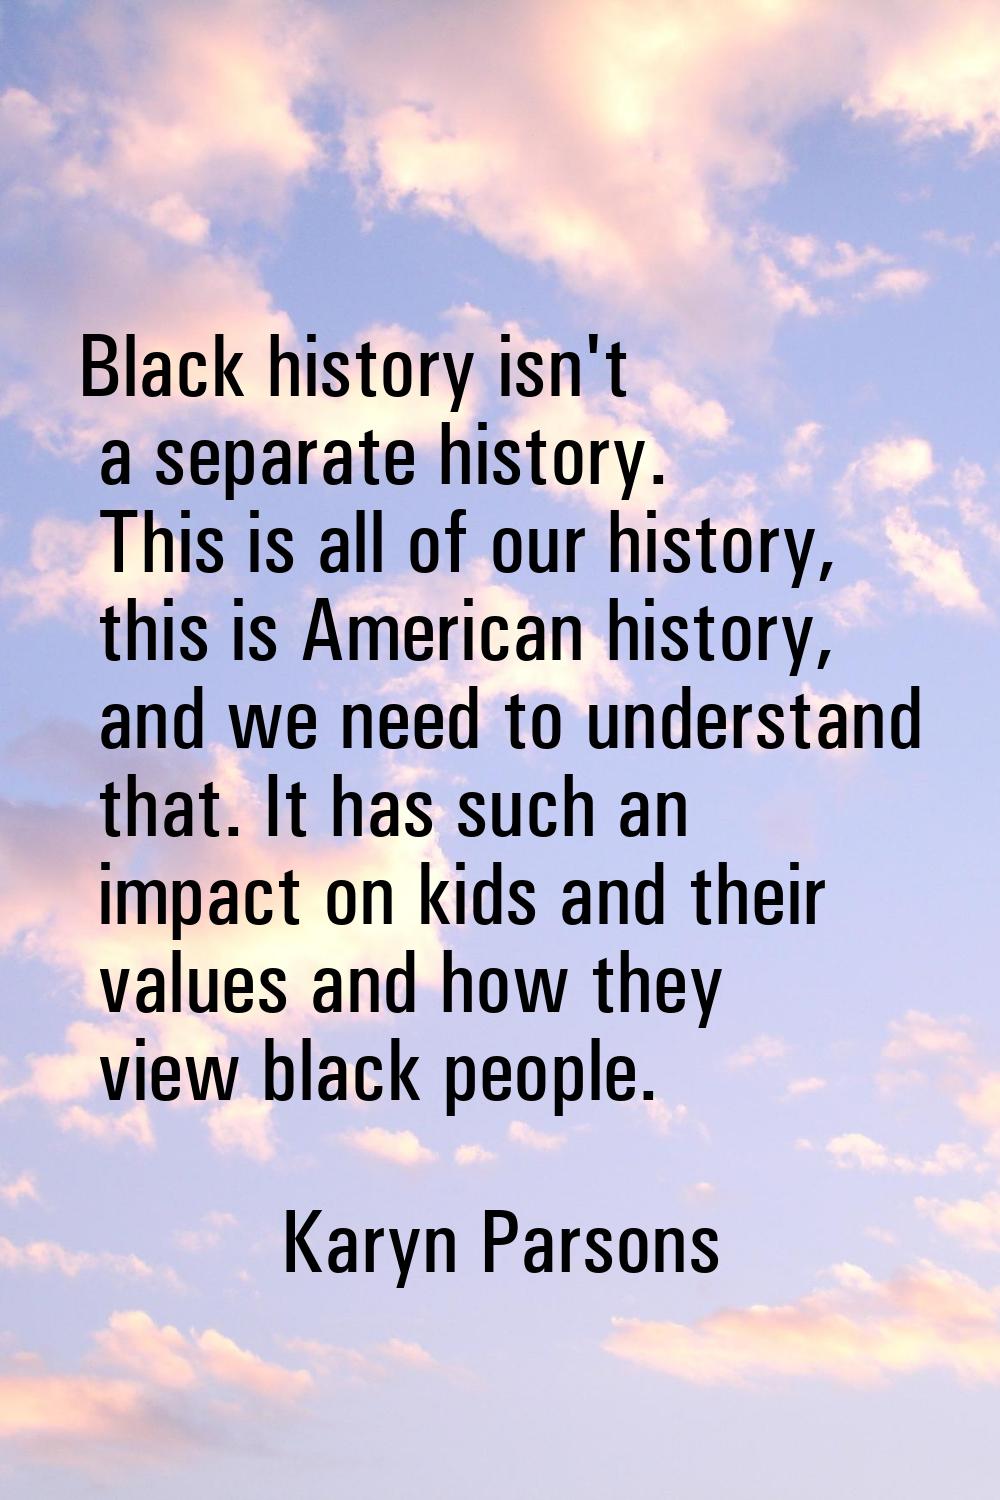 Black history isn't a separate history. This is all of our history, this is American history, and w